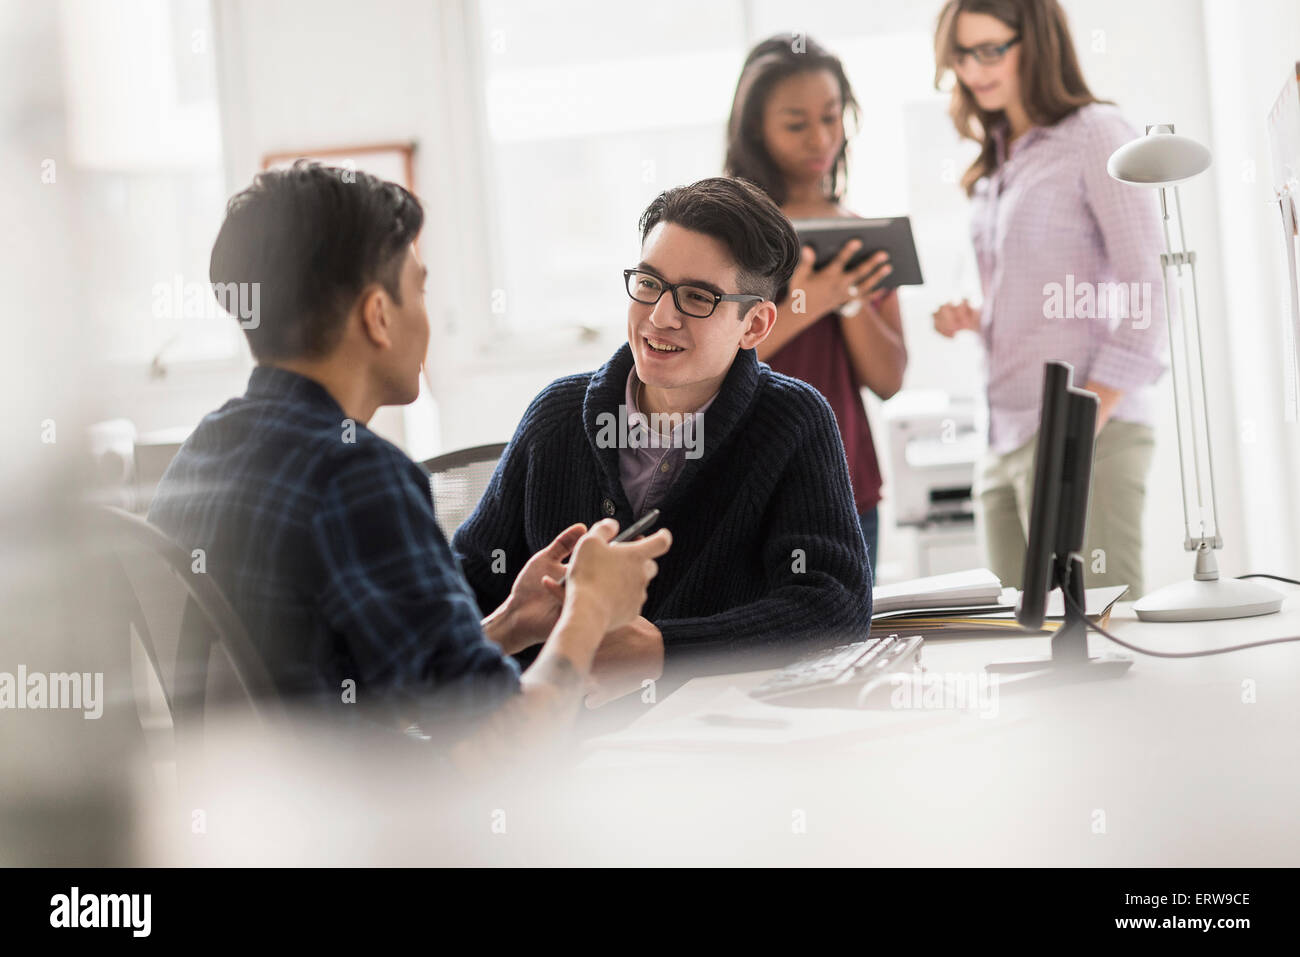 Businessmen working together in office Stock Photo